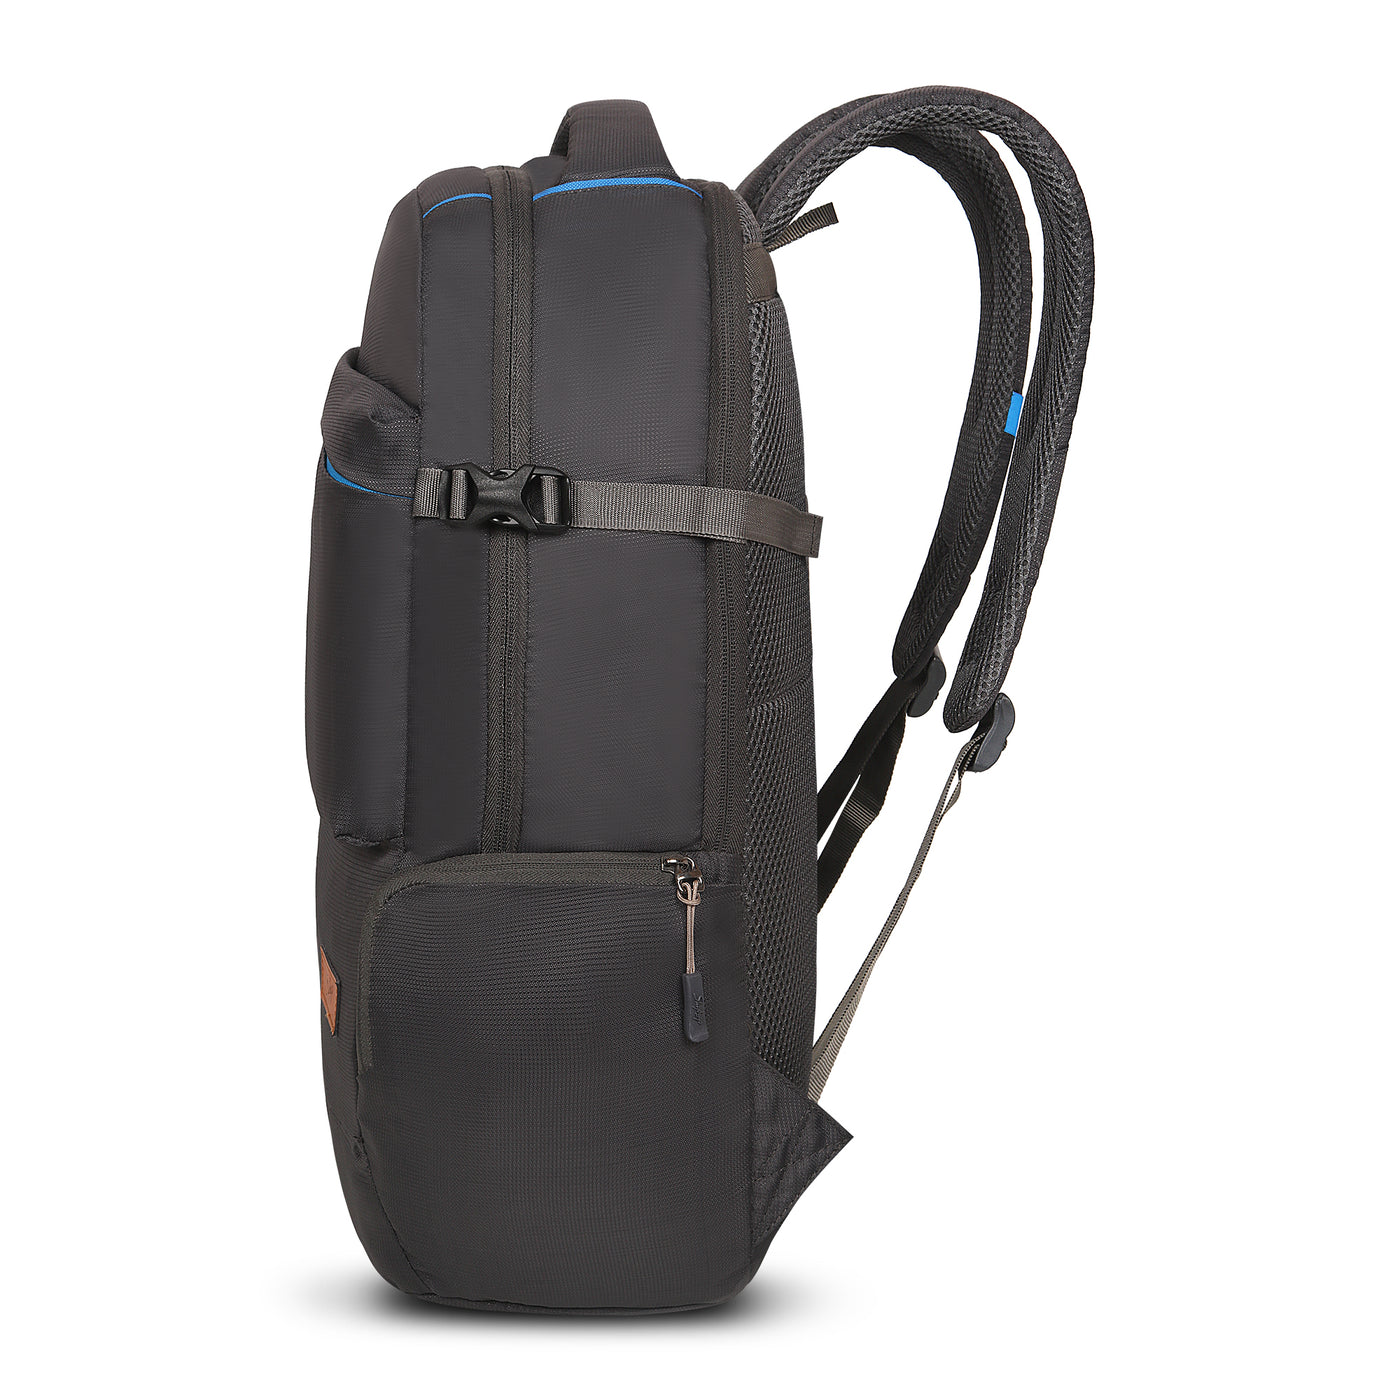 Skybags Chester Pro "03 Laptop Backpack"